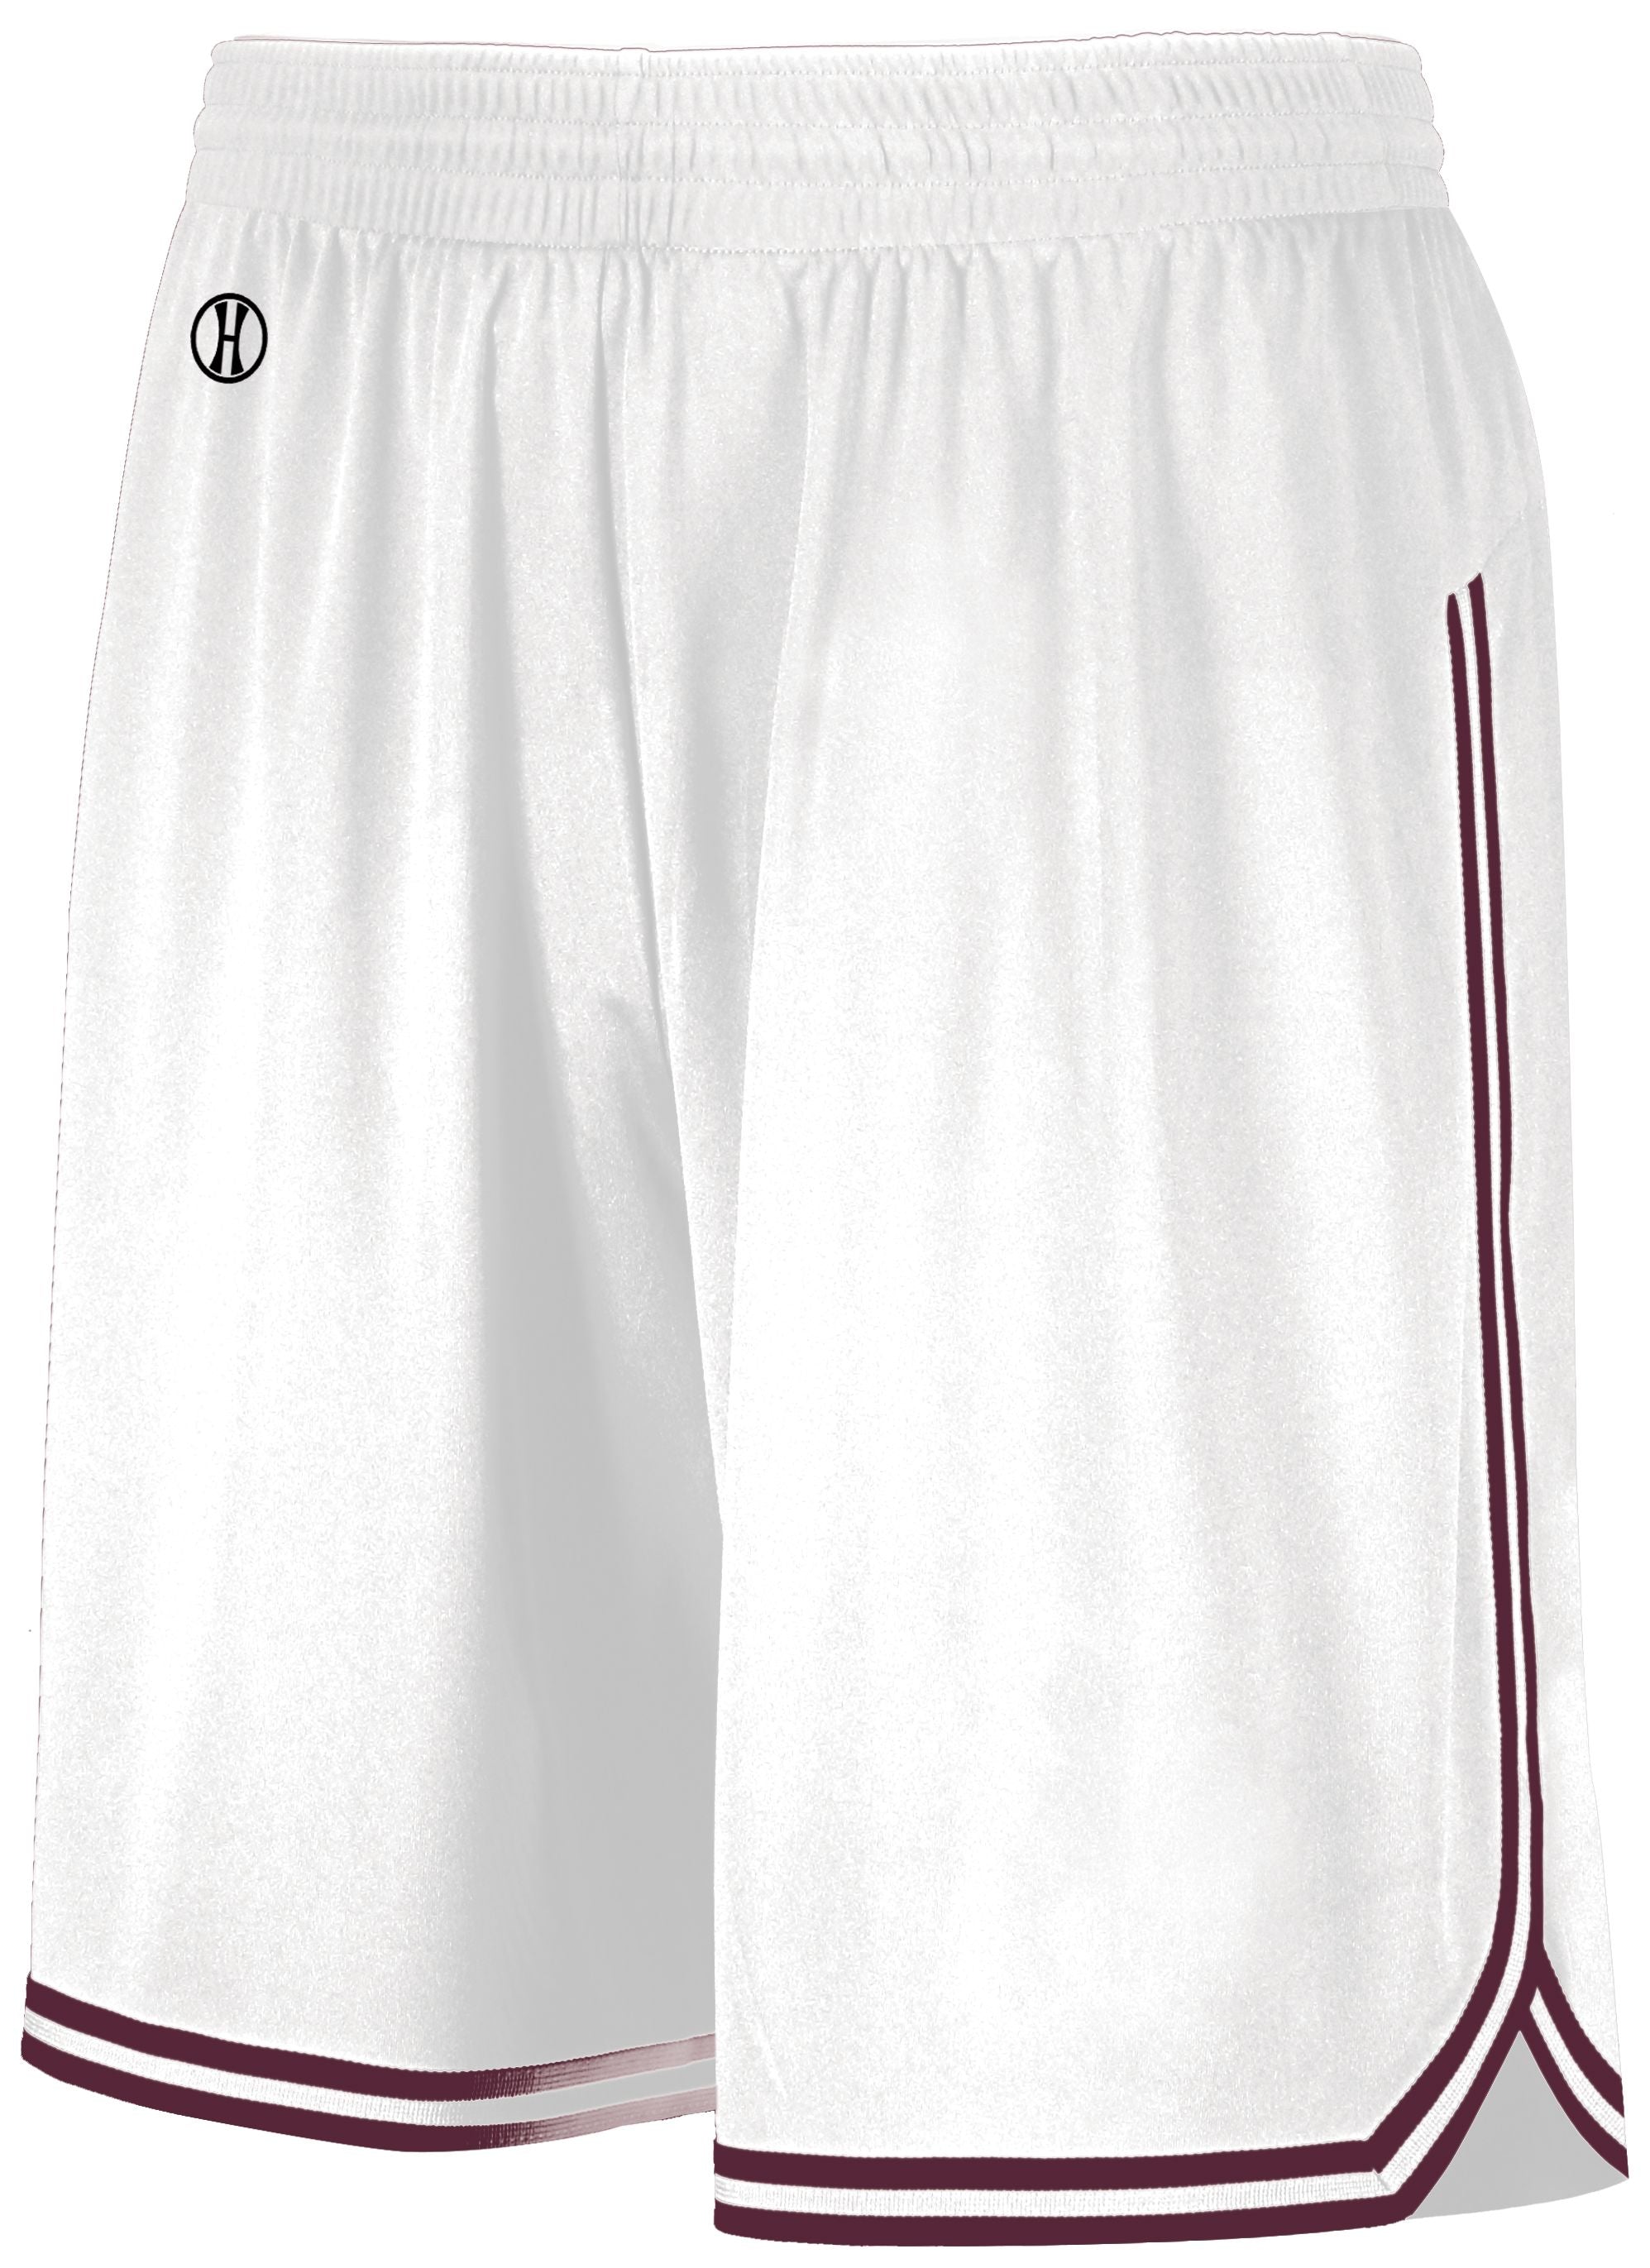 Holloway Retro Basketball Shorts in White/Maroon  -Part of the Adult, Adult-Shorts, Basketball, Holloway, All-Sports, All-Sports-1 product lines at KanaleyCreations.com